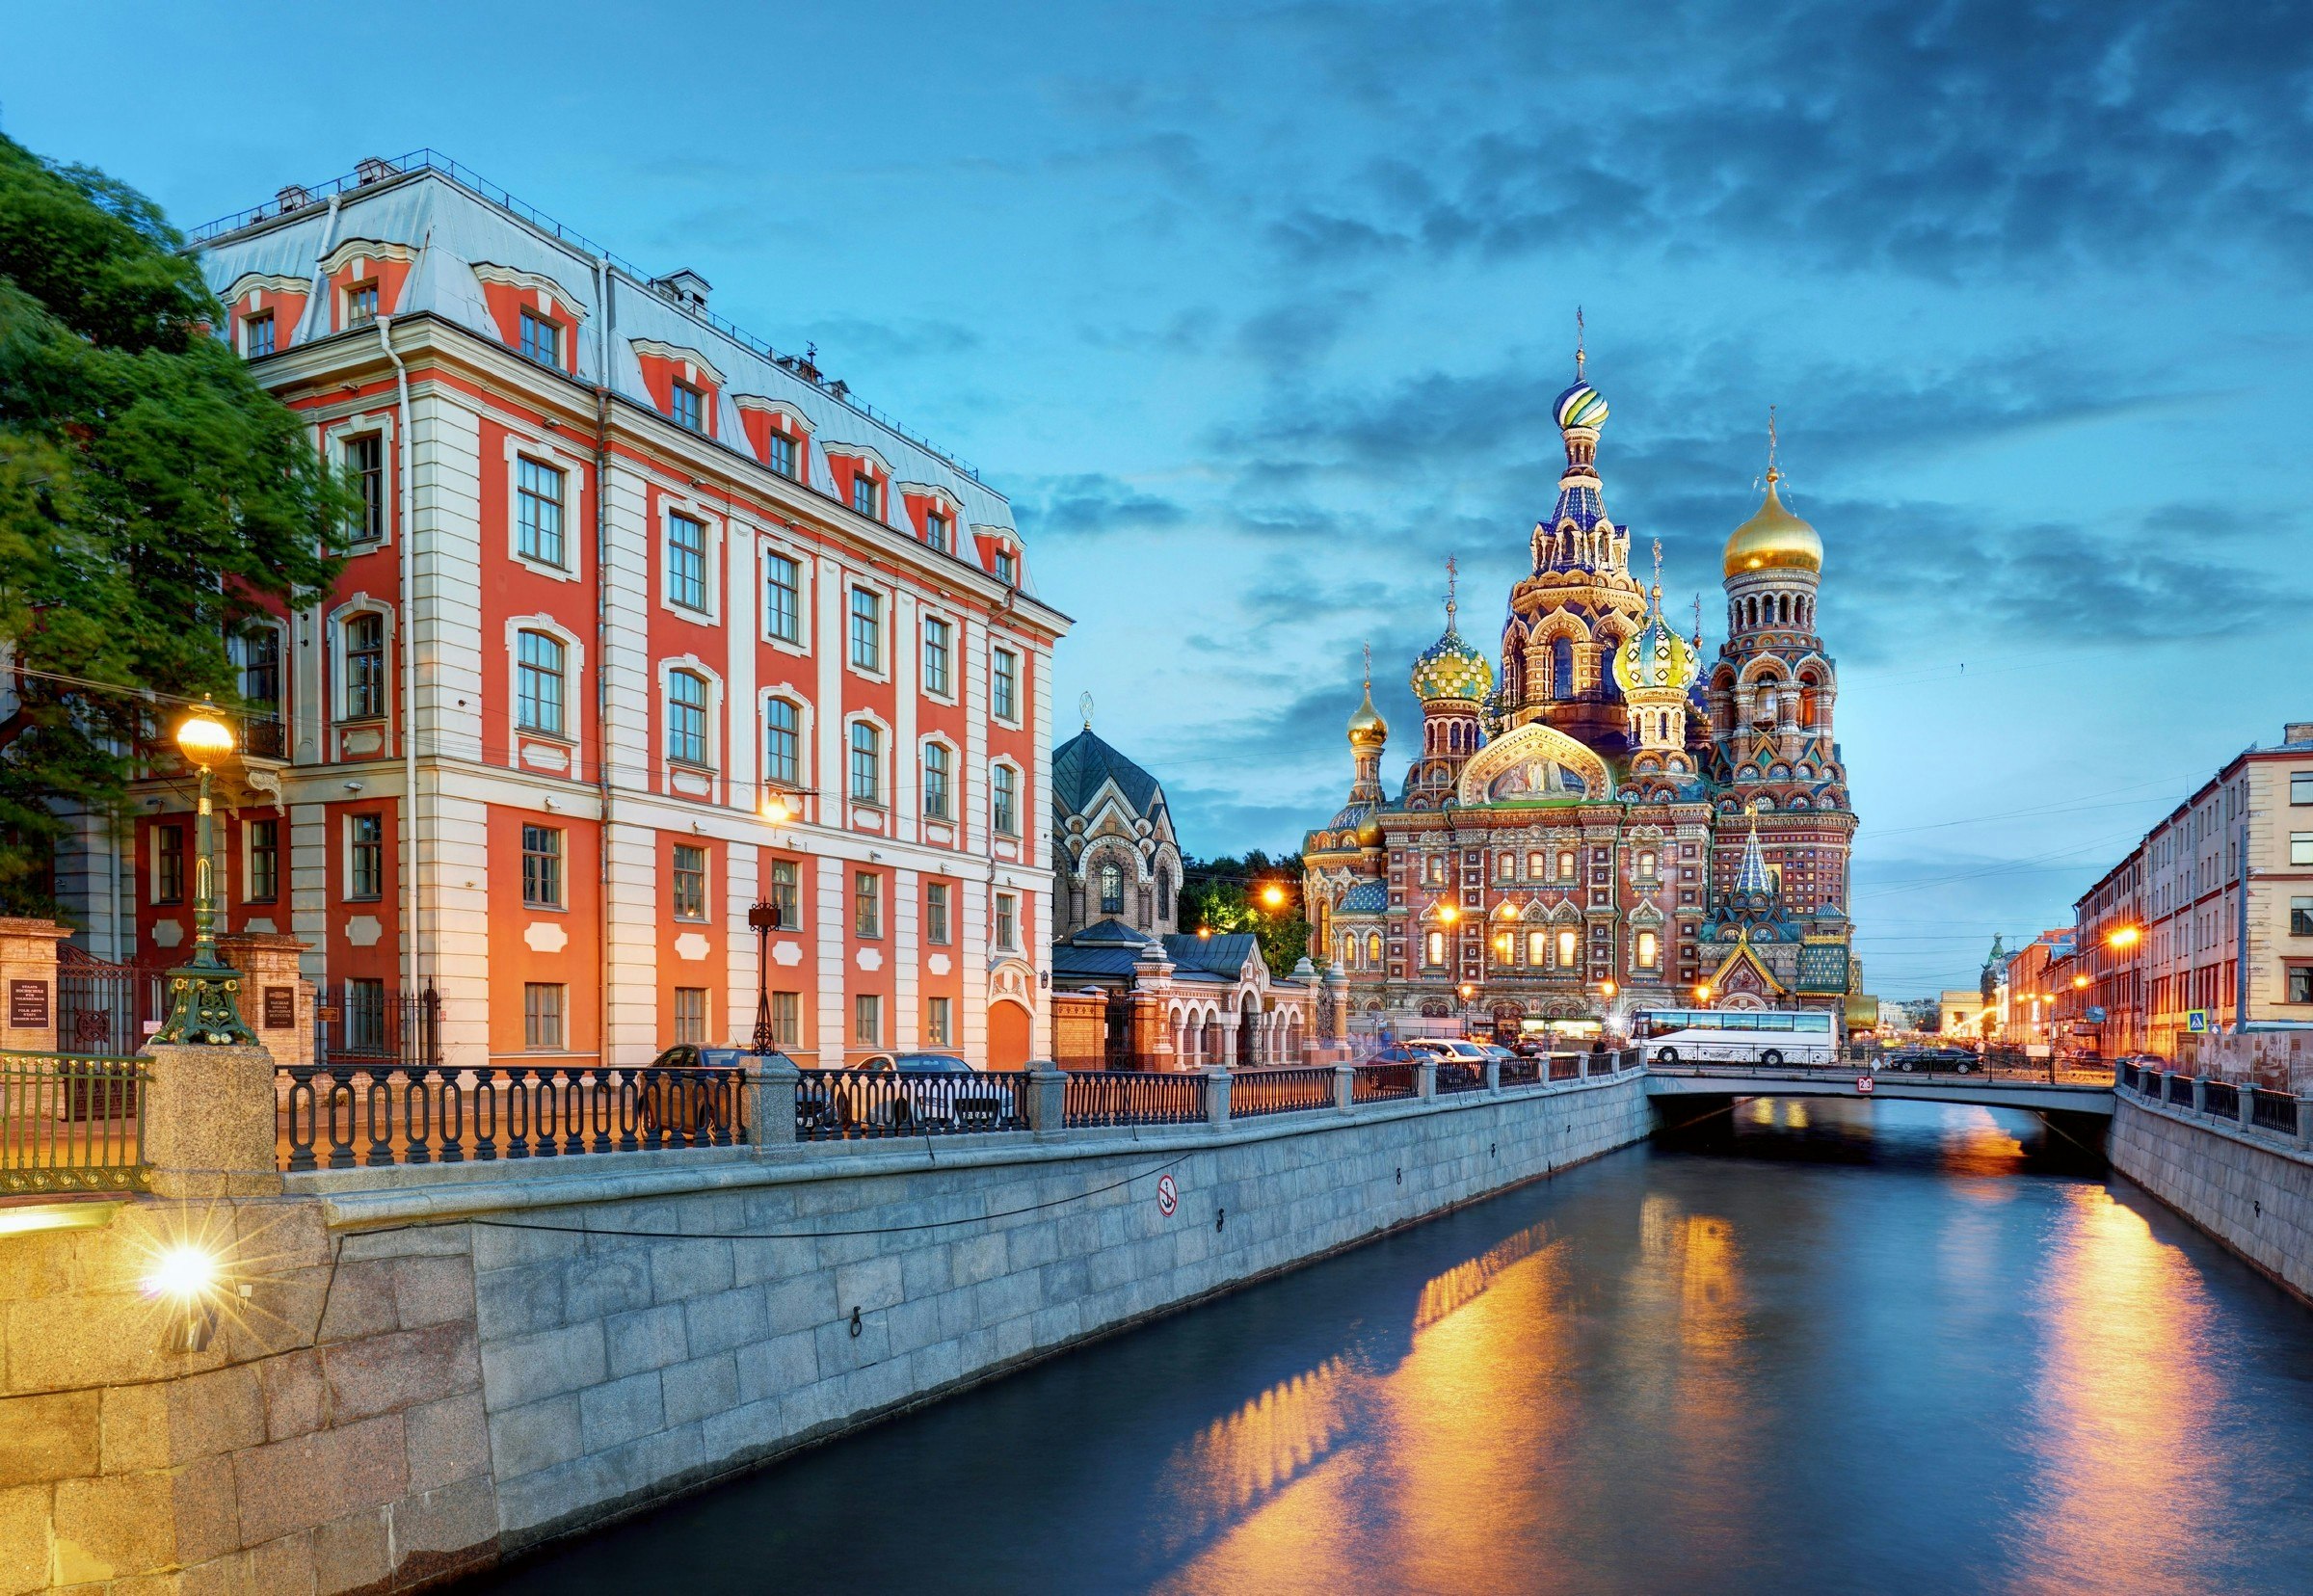 Exterior of the Church of the Saviour on Spilled Blood on the Griboyedov during the evening.